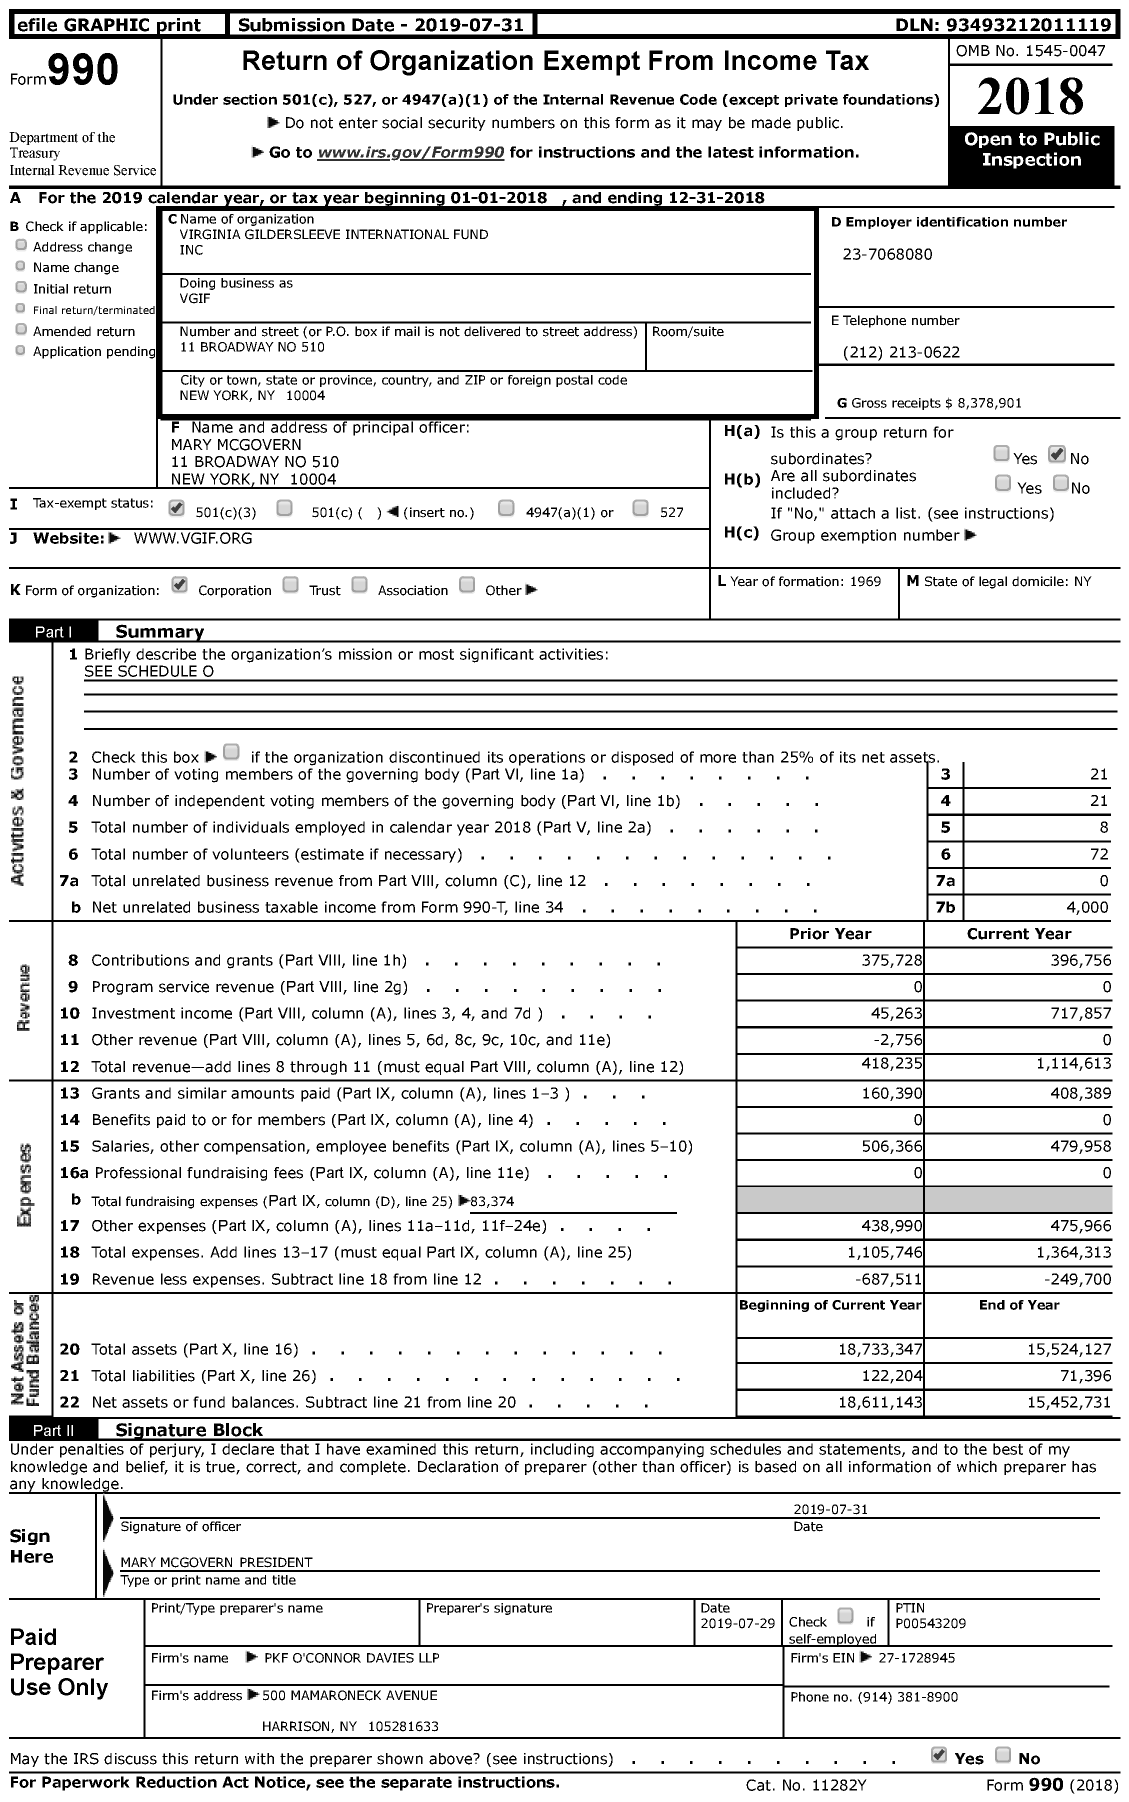 Image of first page of 2018 Form 990 for Women First International Fund Vgif (VGIF)